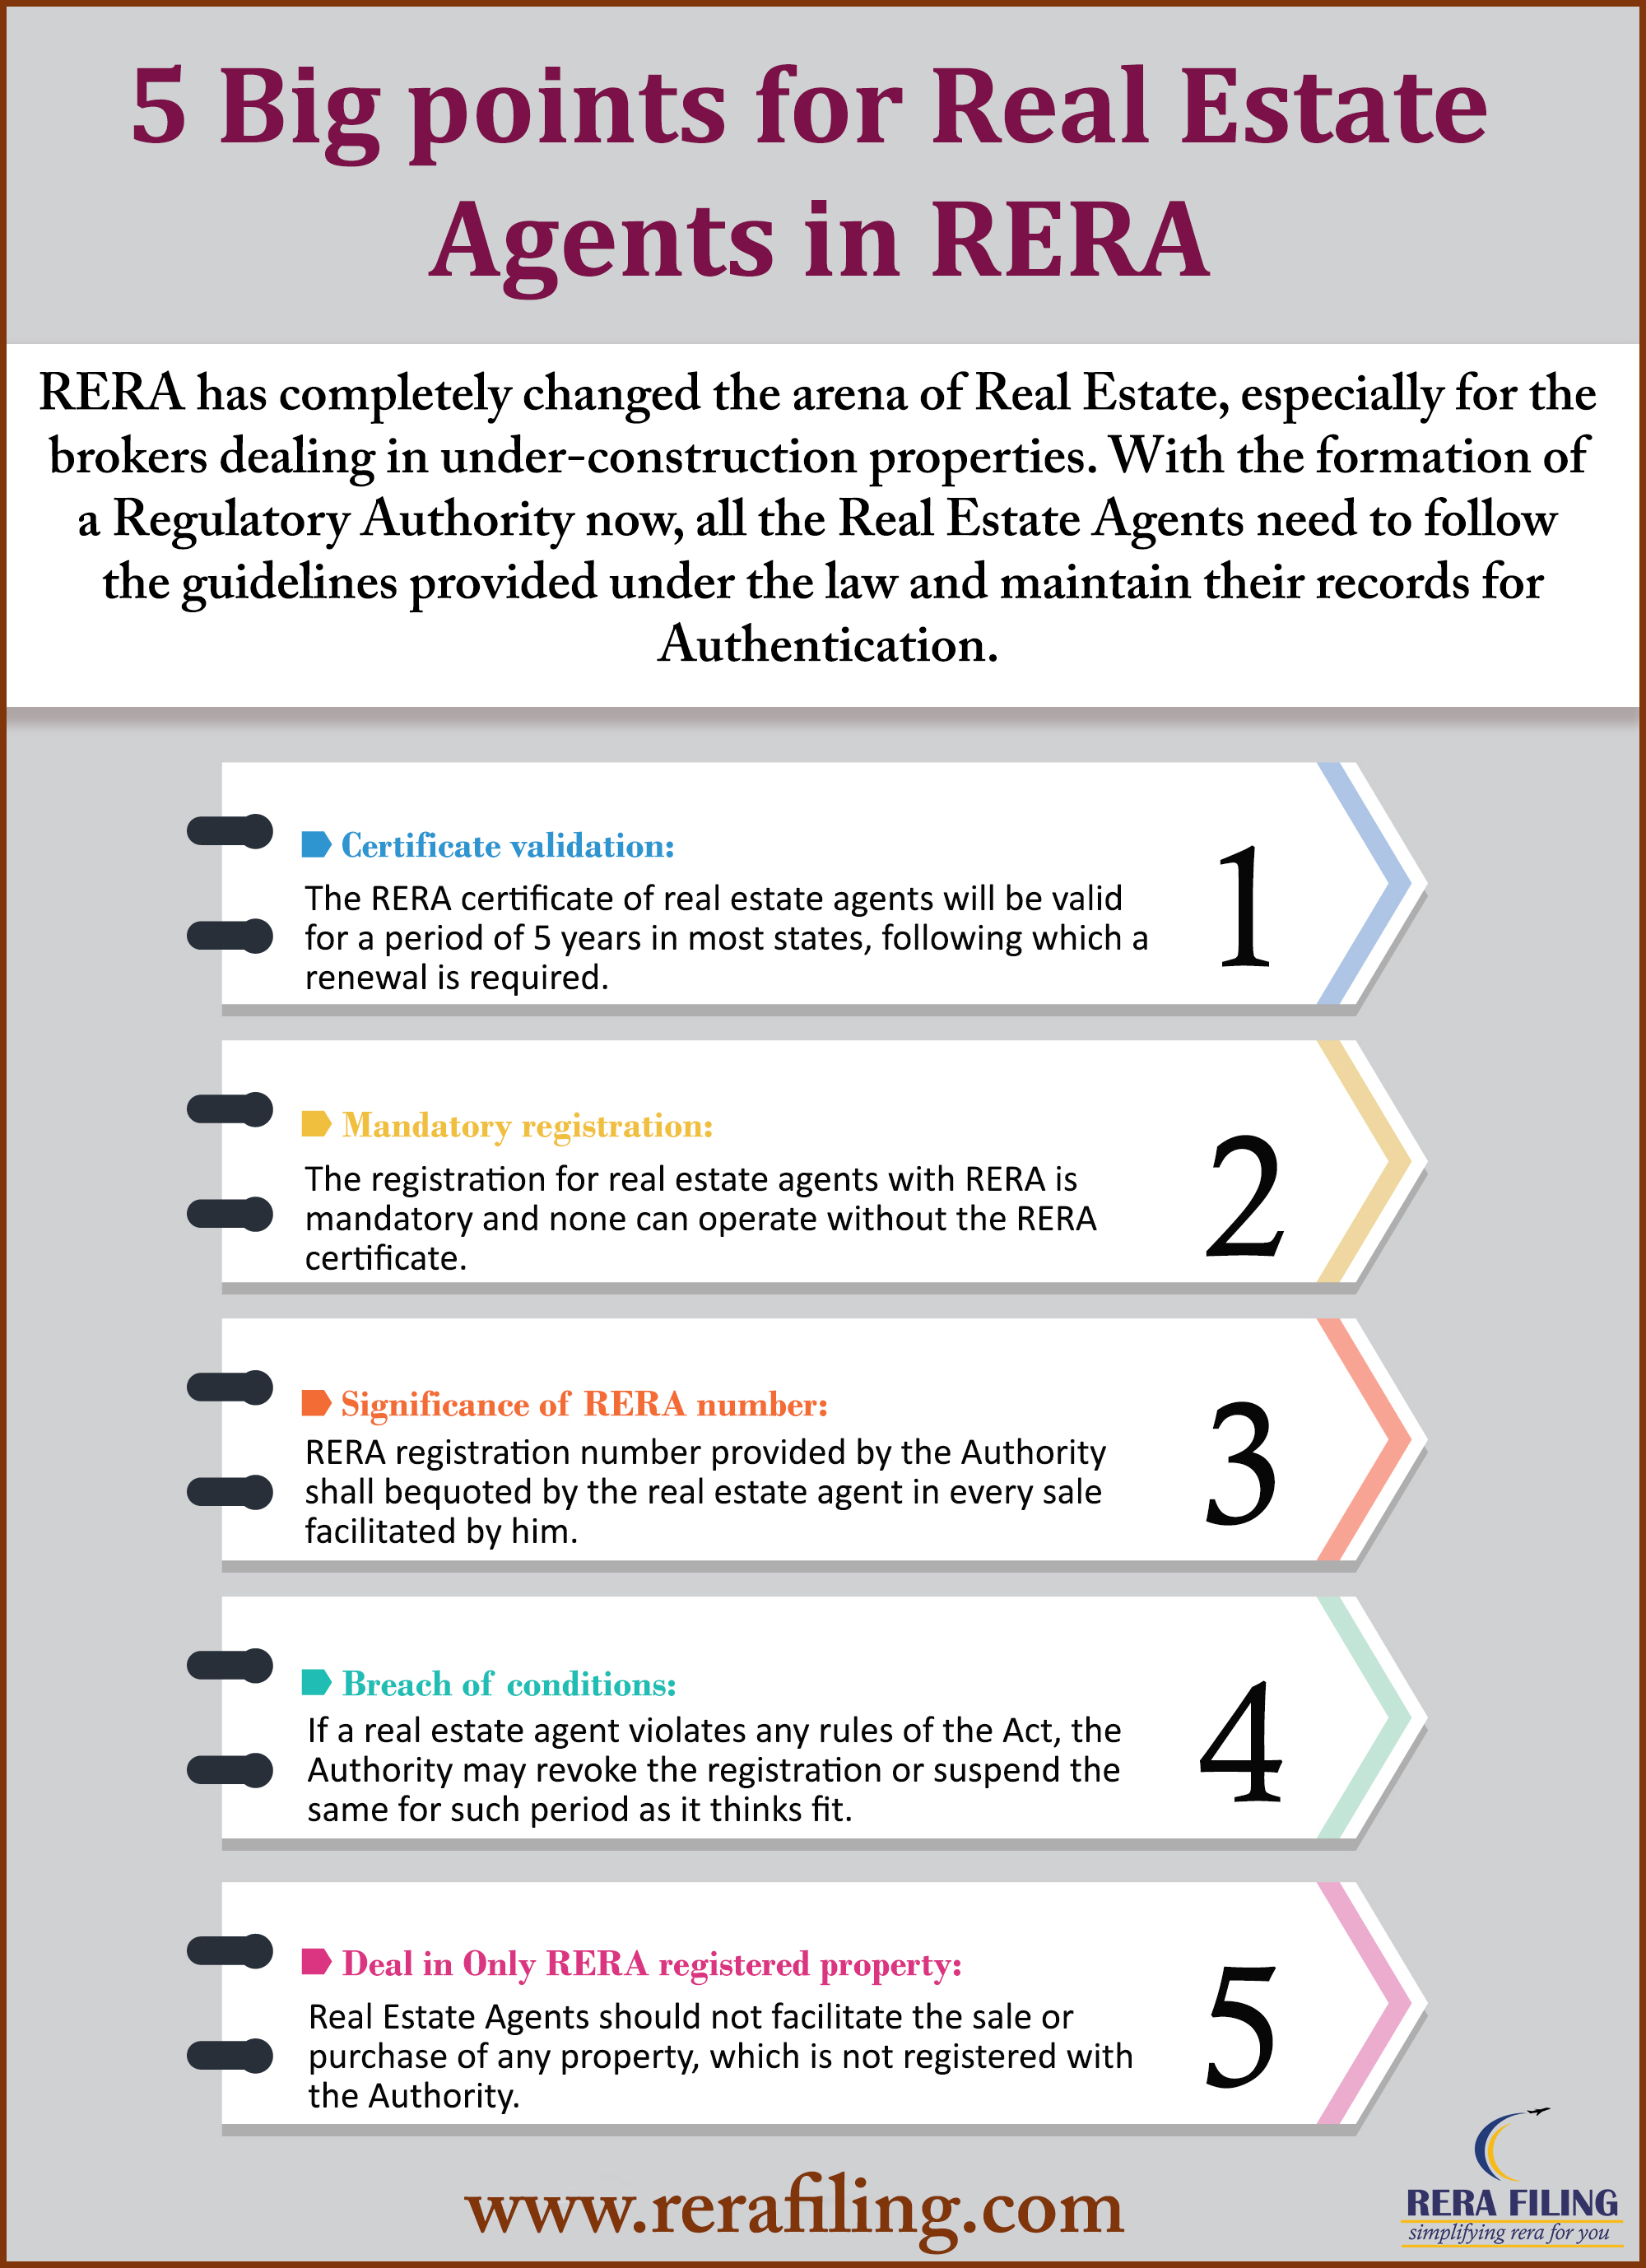 5 Big Points for Real Estate Agents in RERA